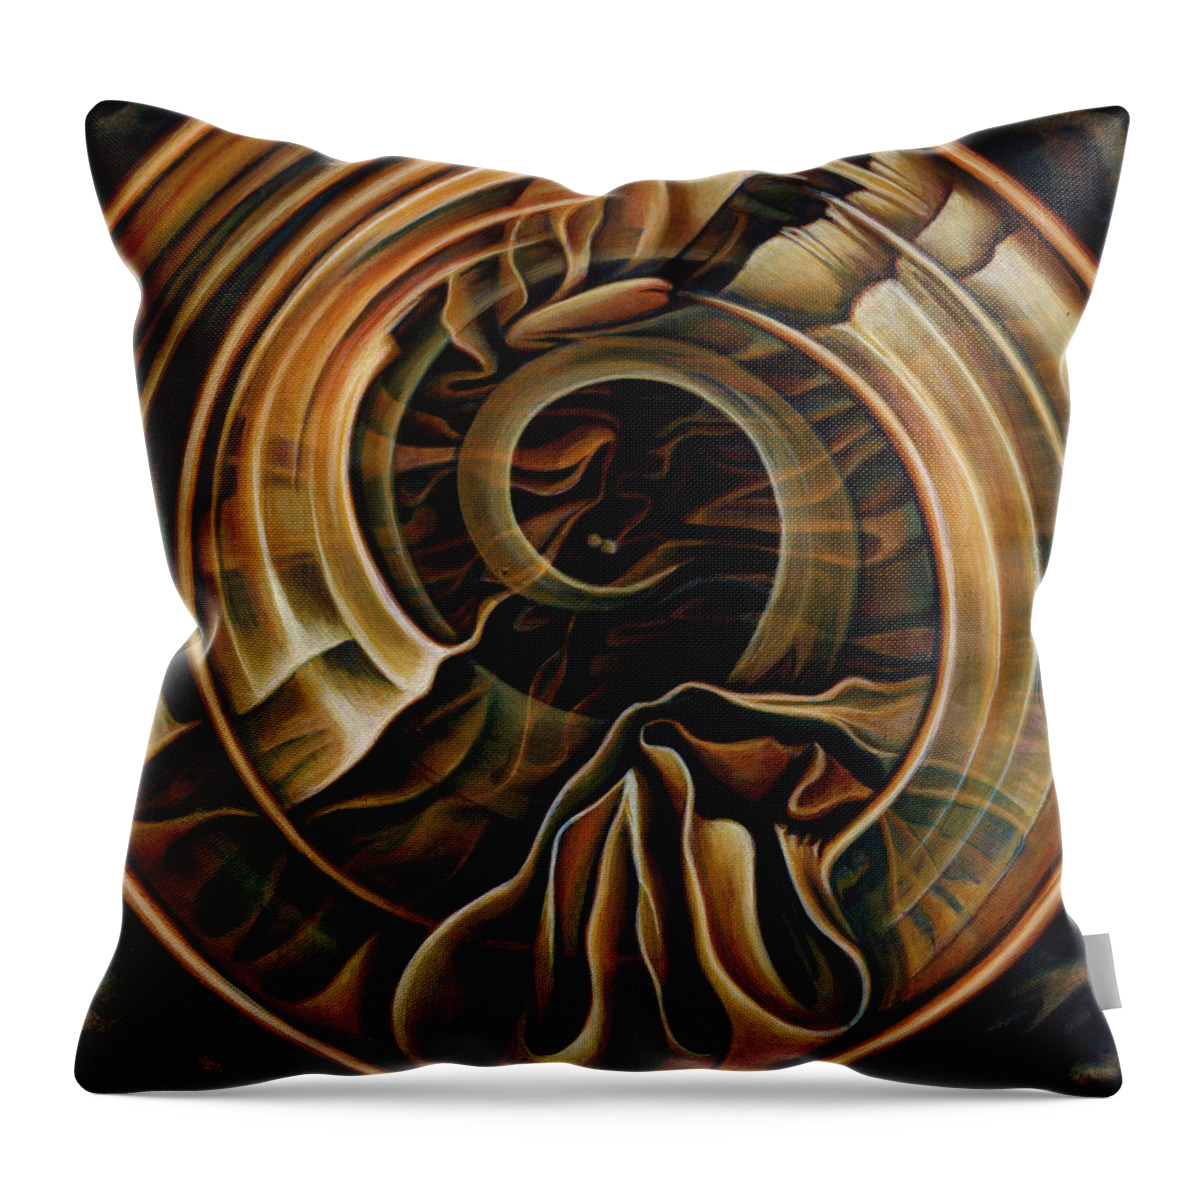 Spiritual Throw Pillow featuring the painting Begging Bowl by Nad Wolinska